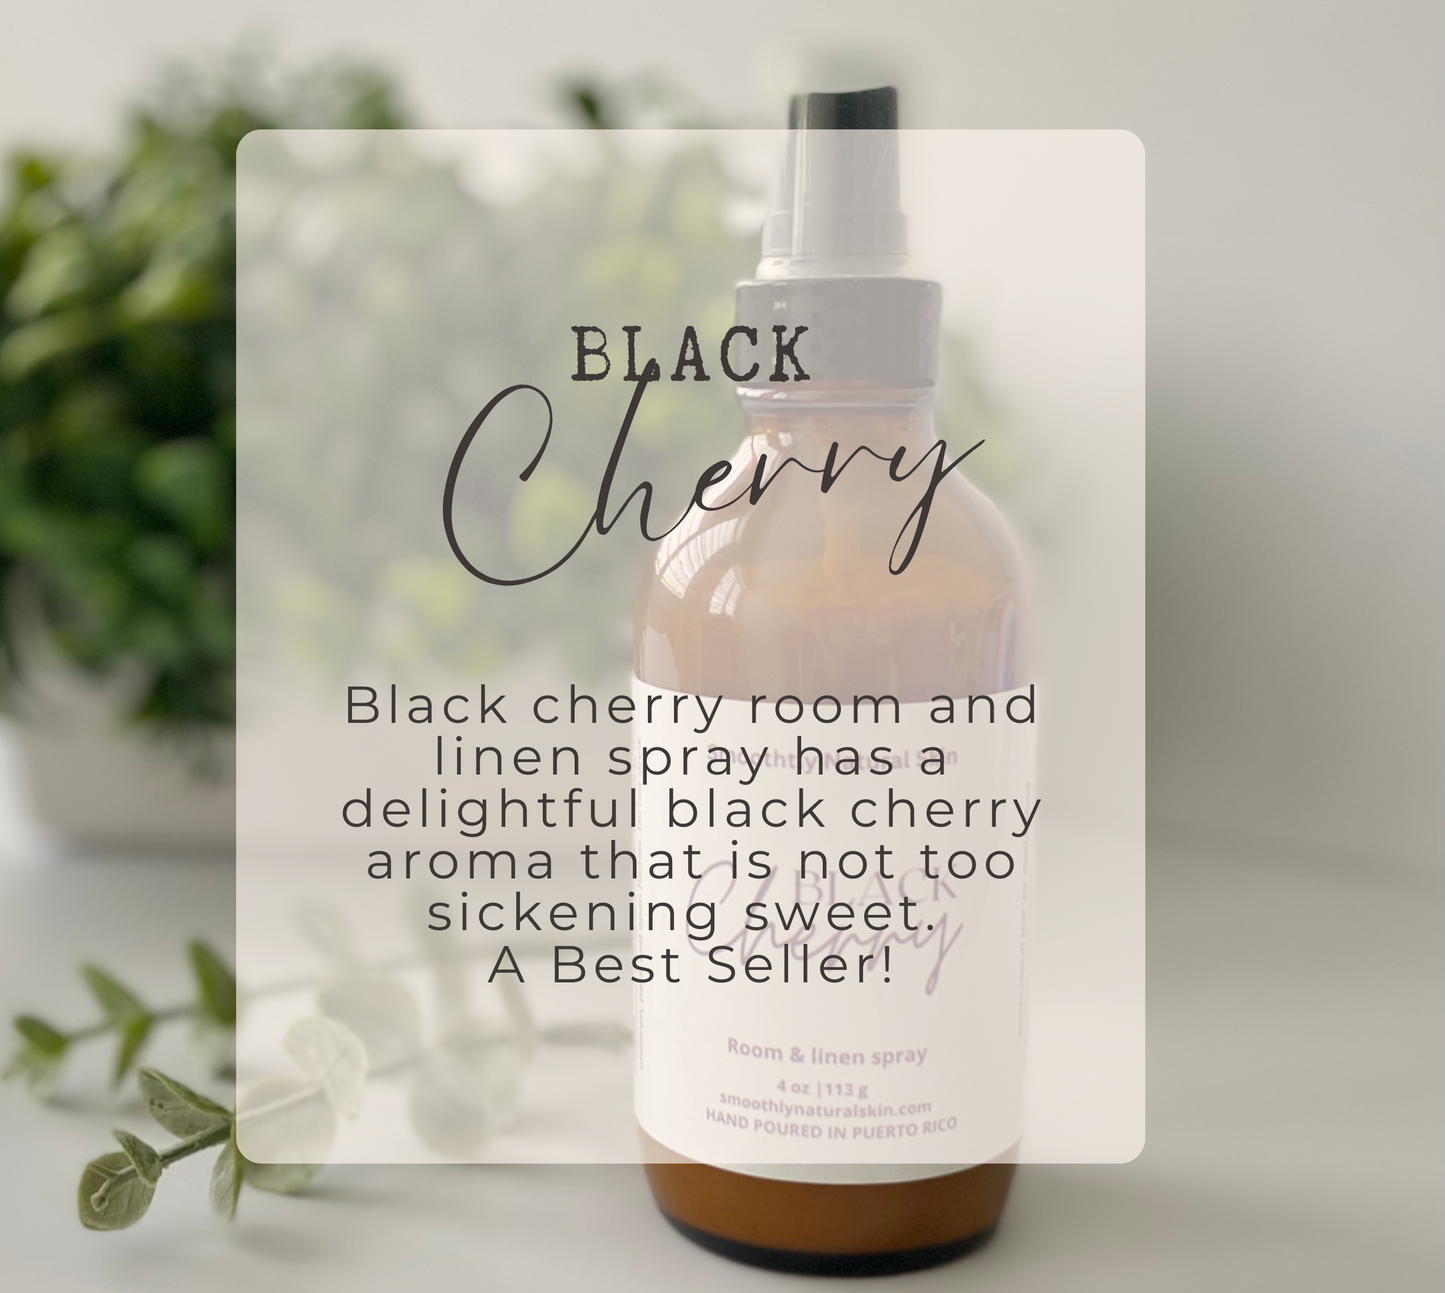 Black cherry room and linen spray has a delightful black cherry aroma that is not too sickening sweet.  A Best Seller!